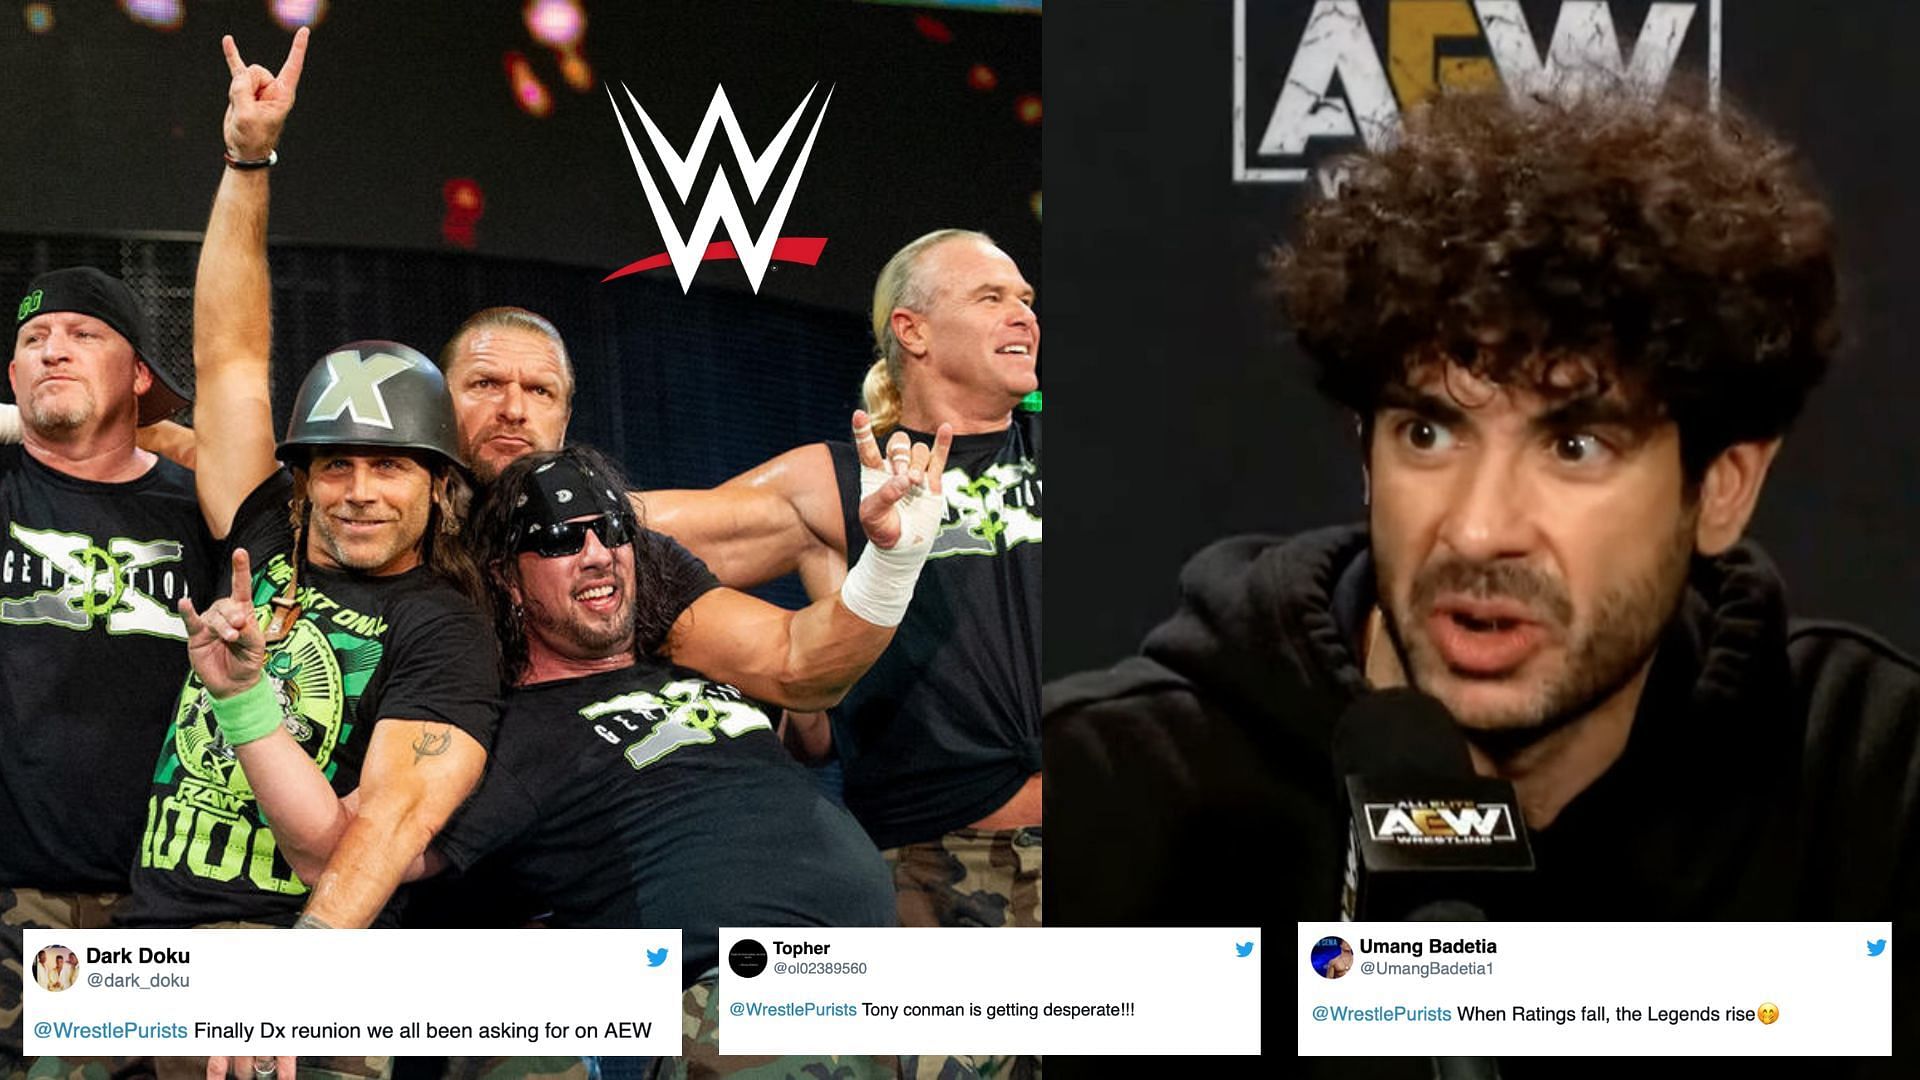 "Finally DX reunion we all been asking for on AEW" Twitter erupts to